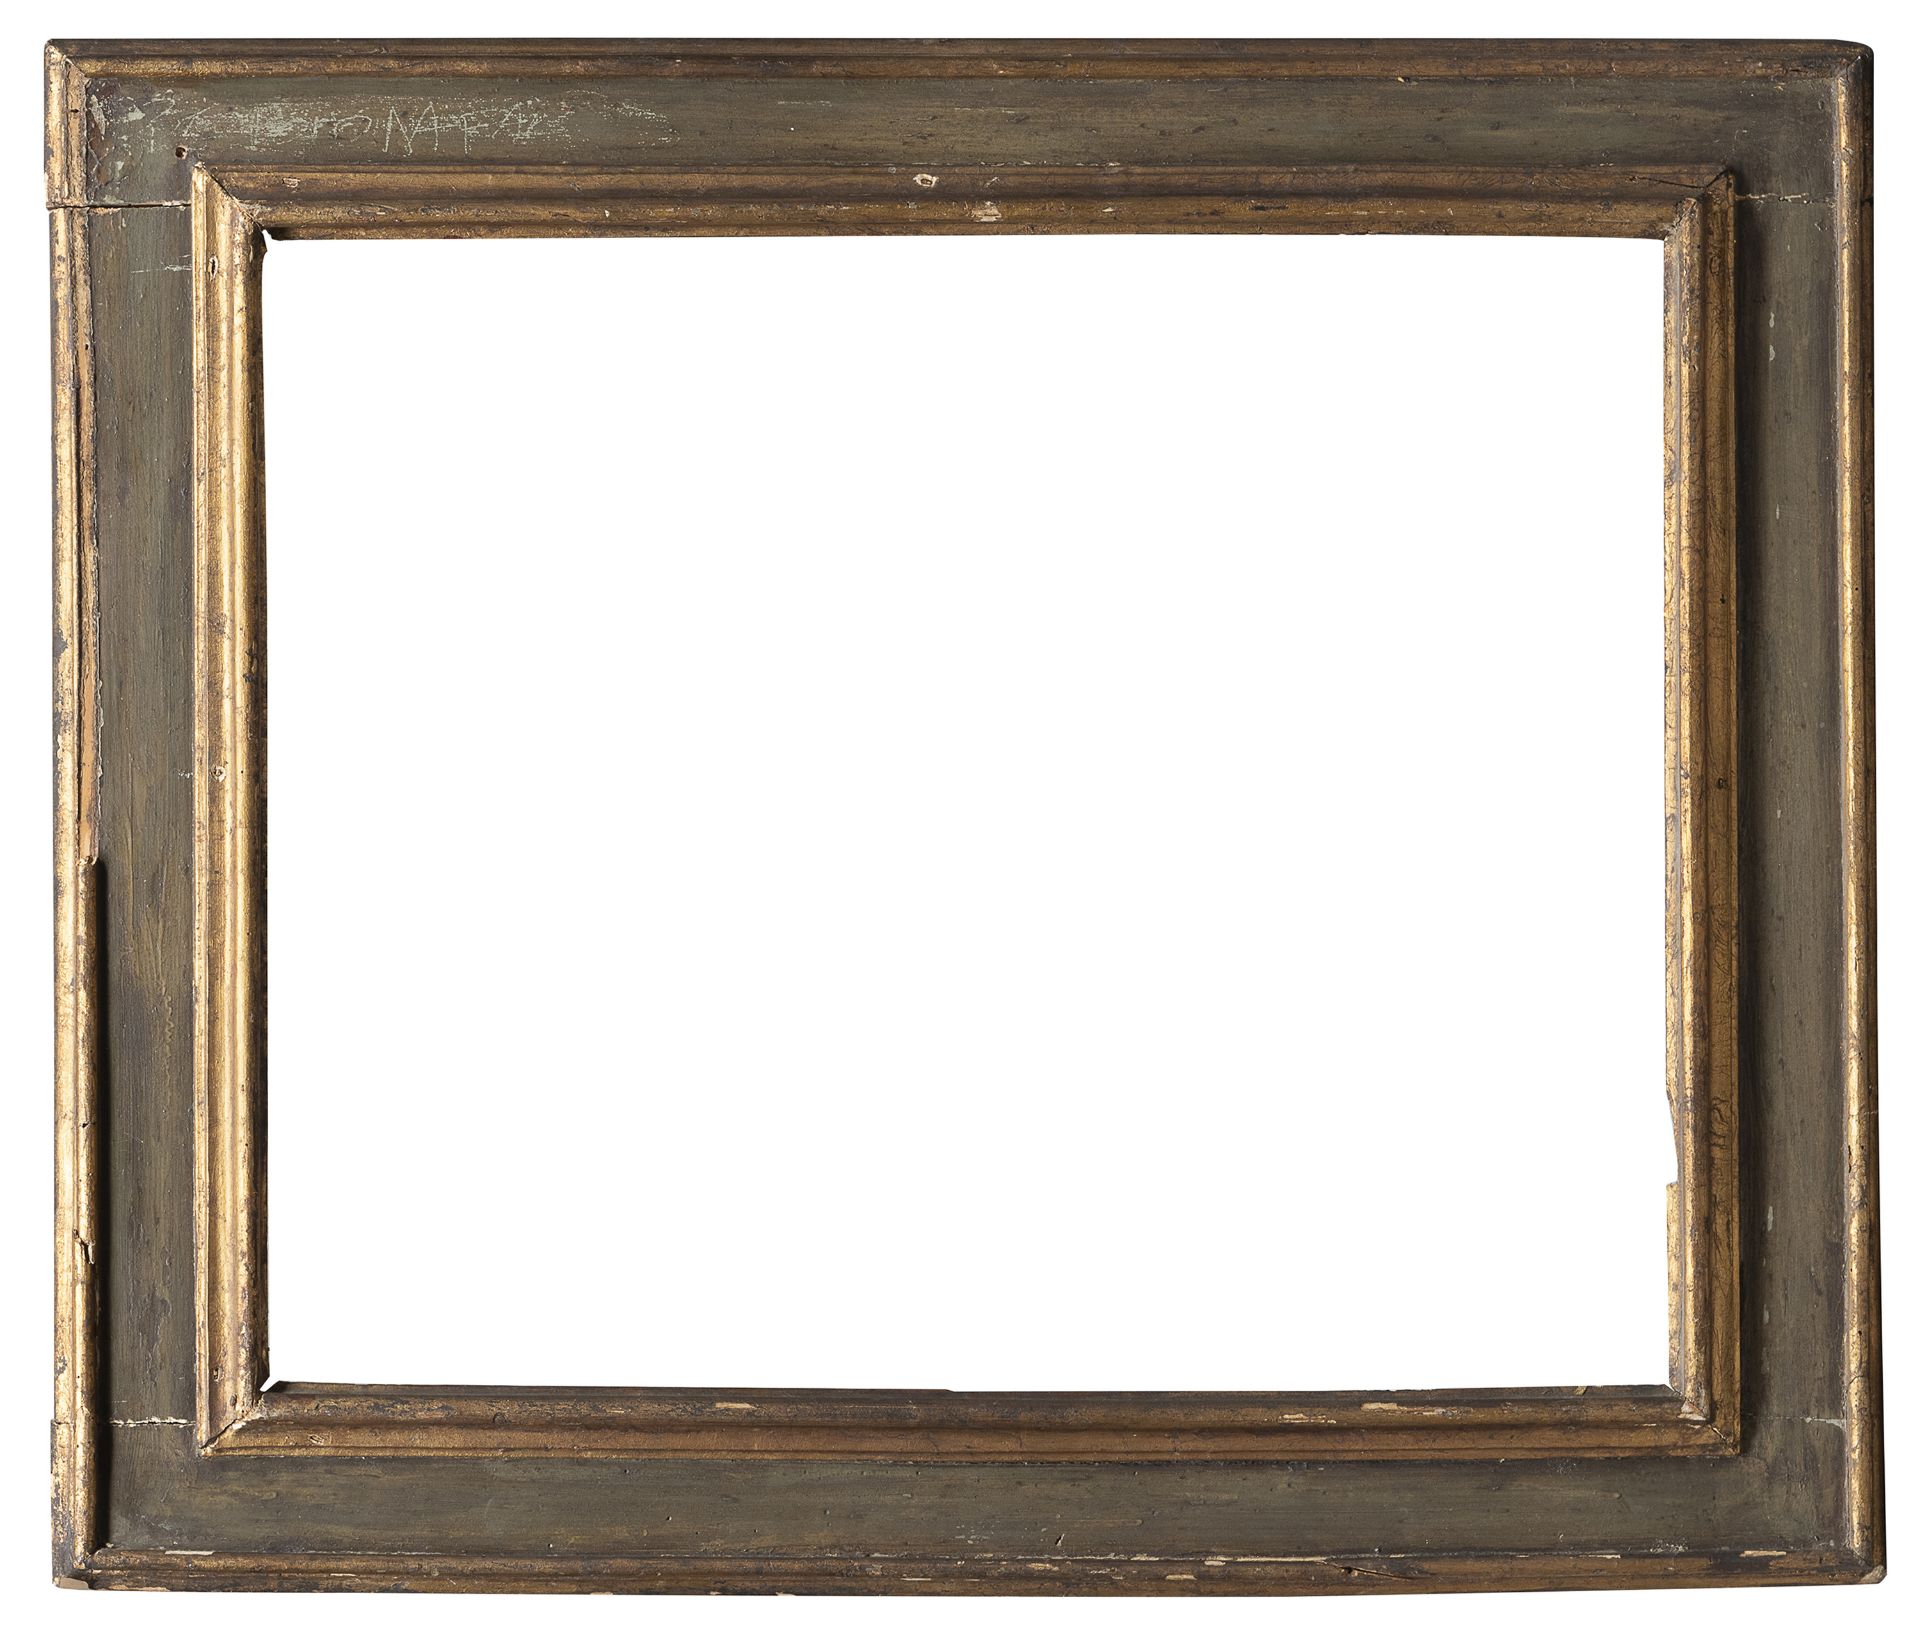 LACQUERED WOOD FRAME 17th CENTURY